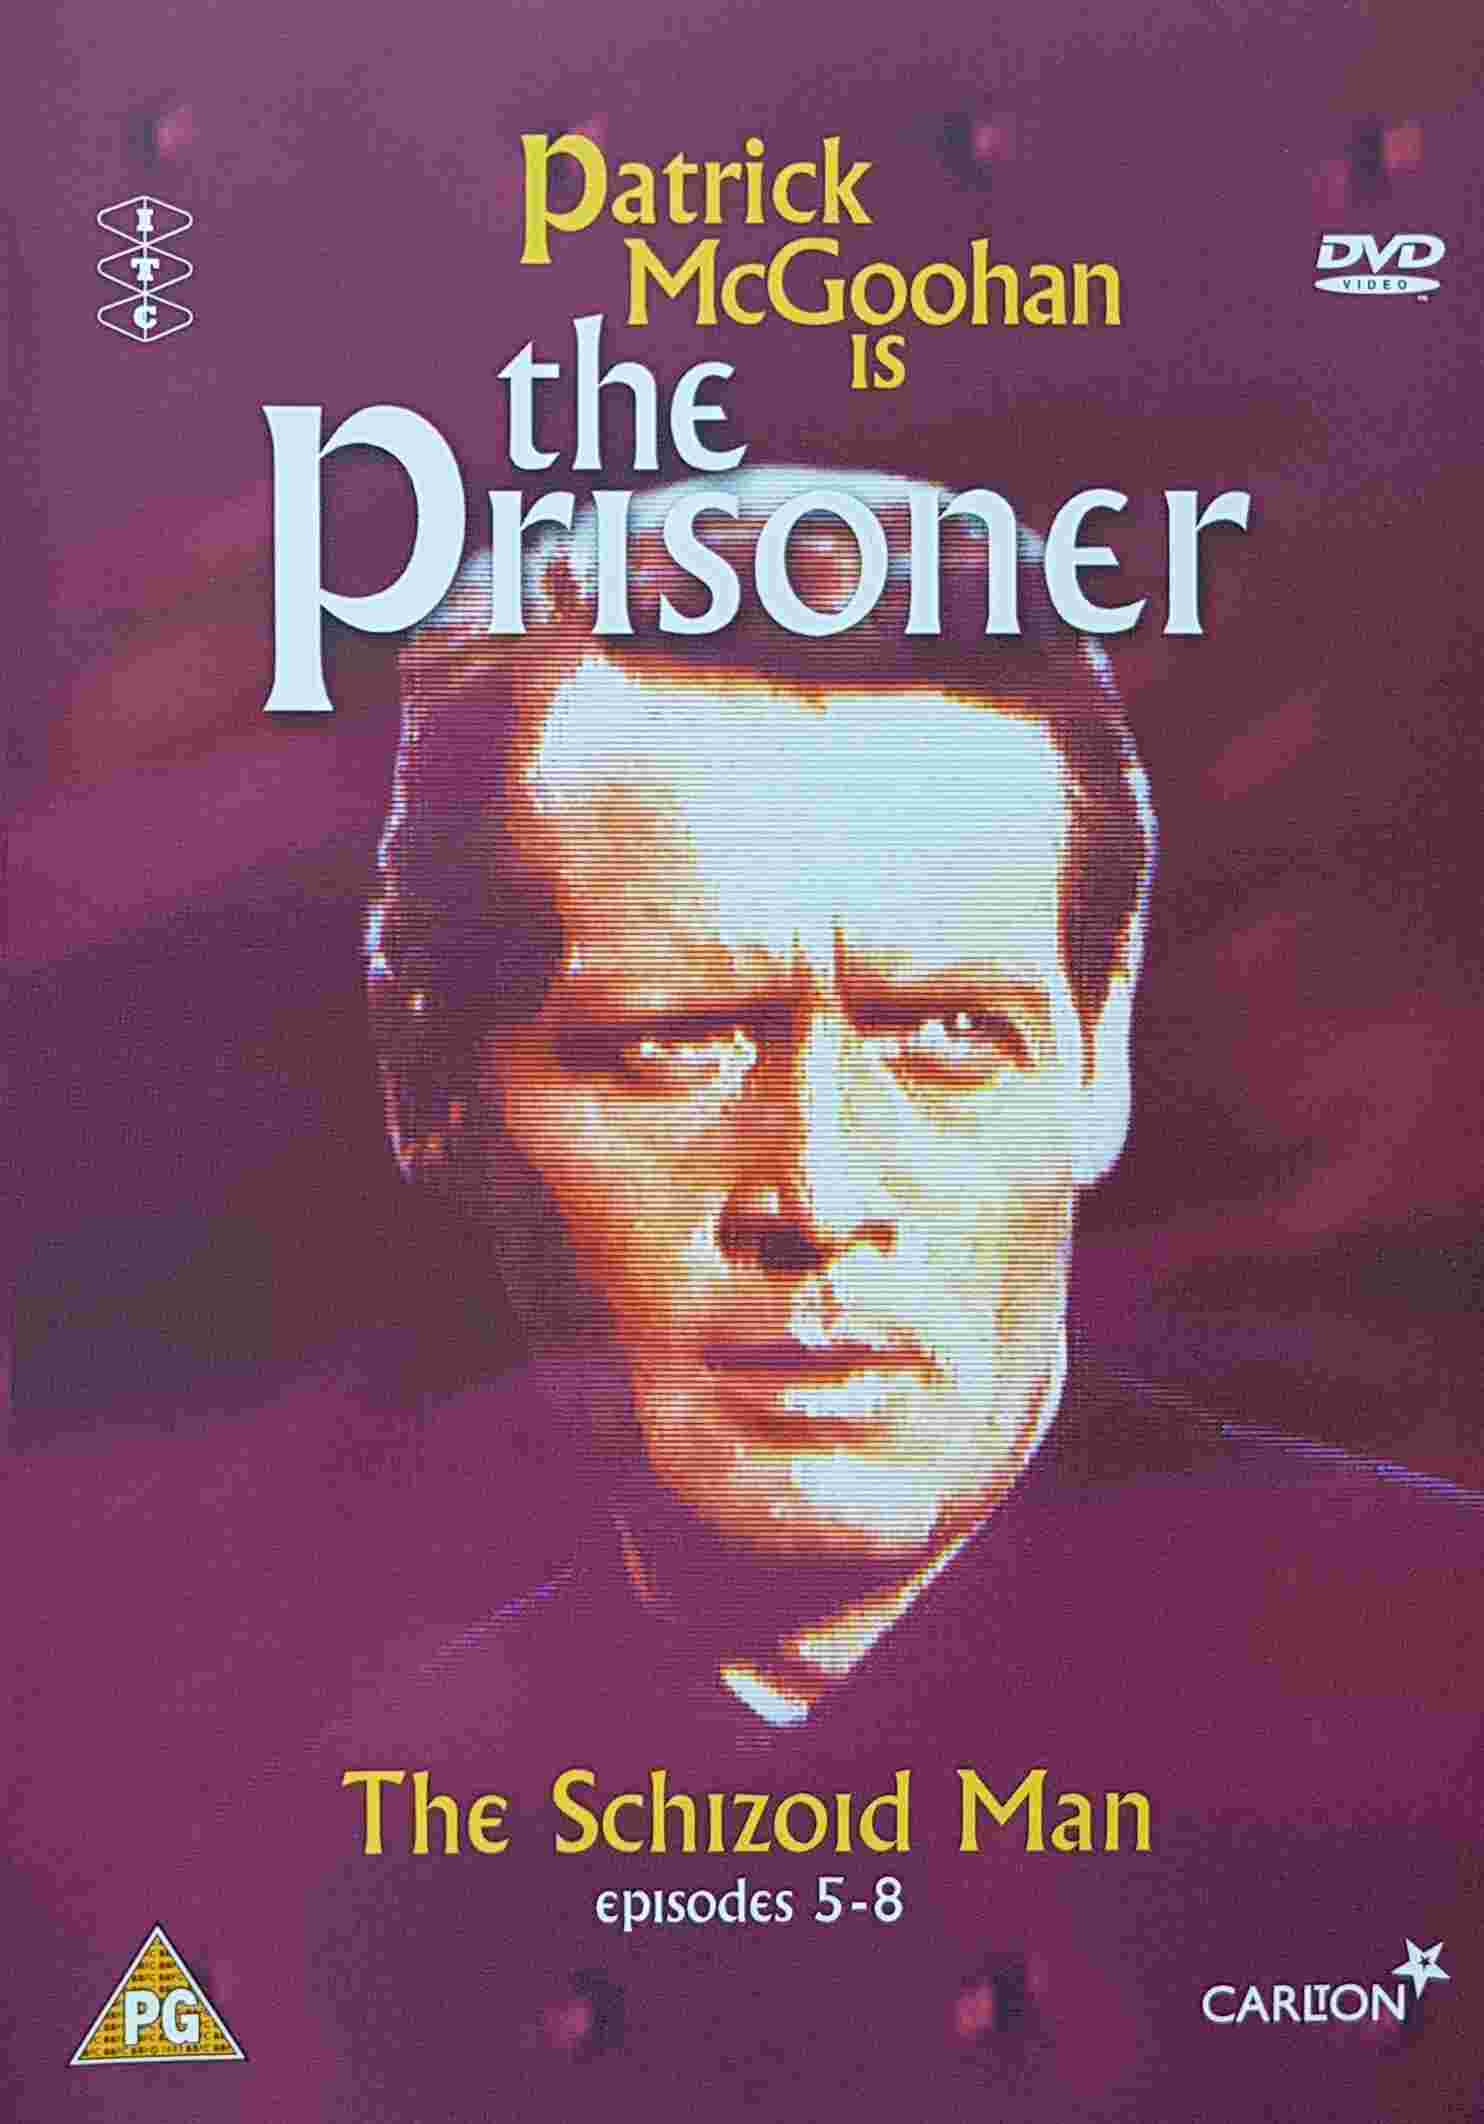 Picture of 37115 00953 The prisoner - Episodes 5 - 8 by artist Various from ITV, Channel 4 and Channel 5 library